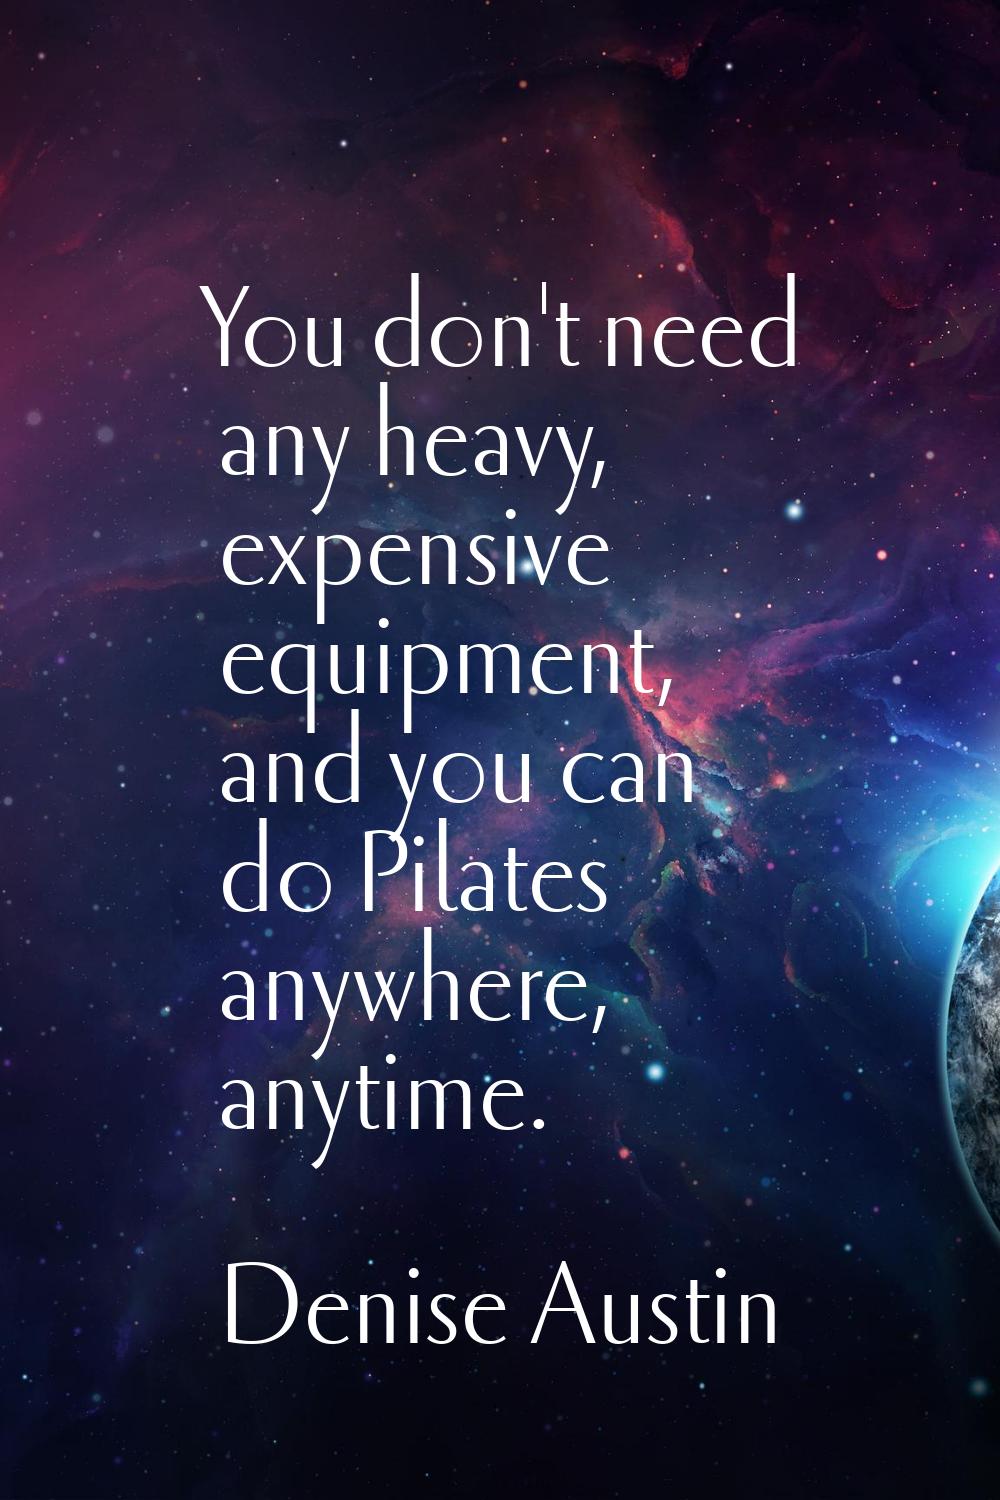 You don't need any heavy, expensive equipment, and you can do Pilates anywhere, anytime.